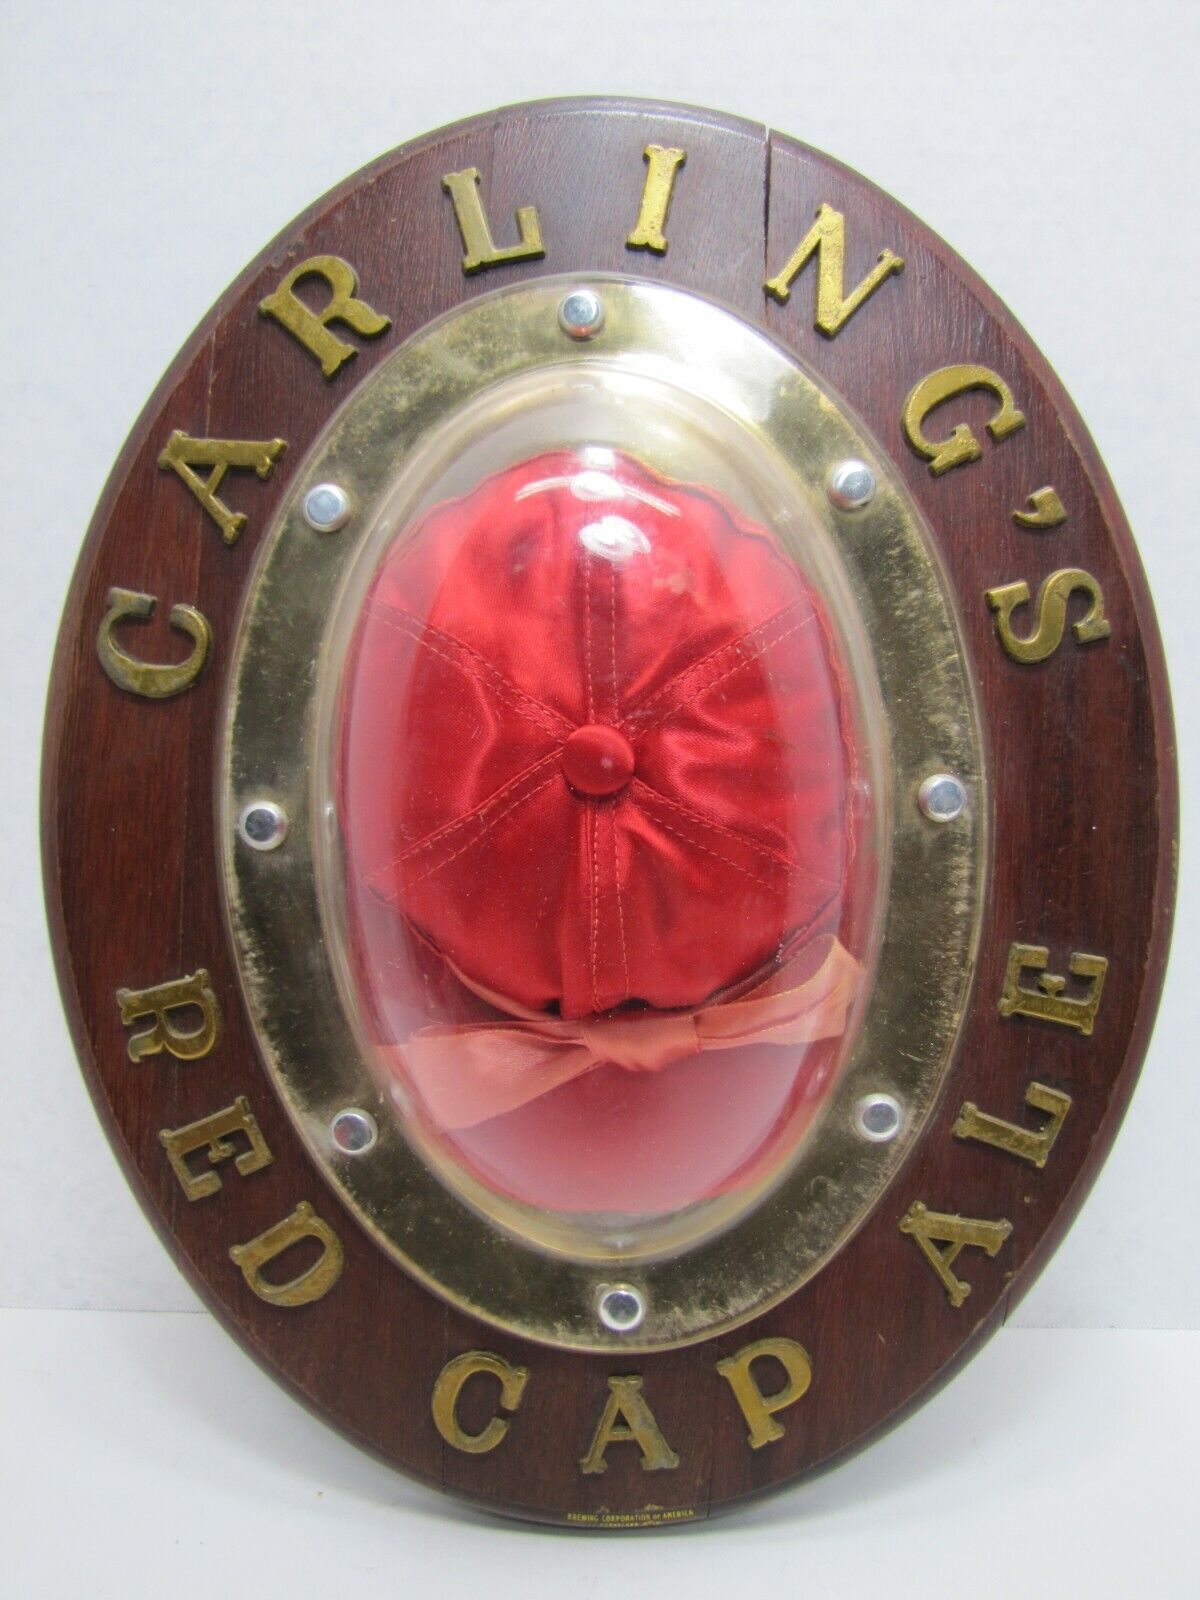 CARLING'S RED CAP ALE Sign Old RHTF Version Wood Planks Raised Letters Plym Co